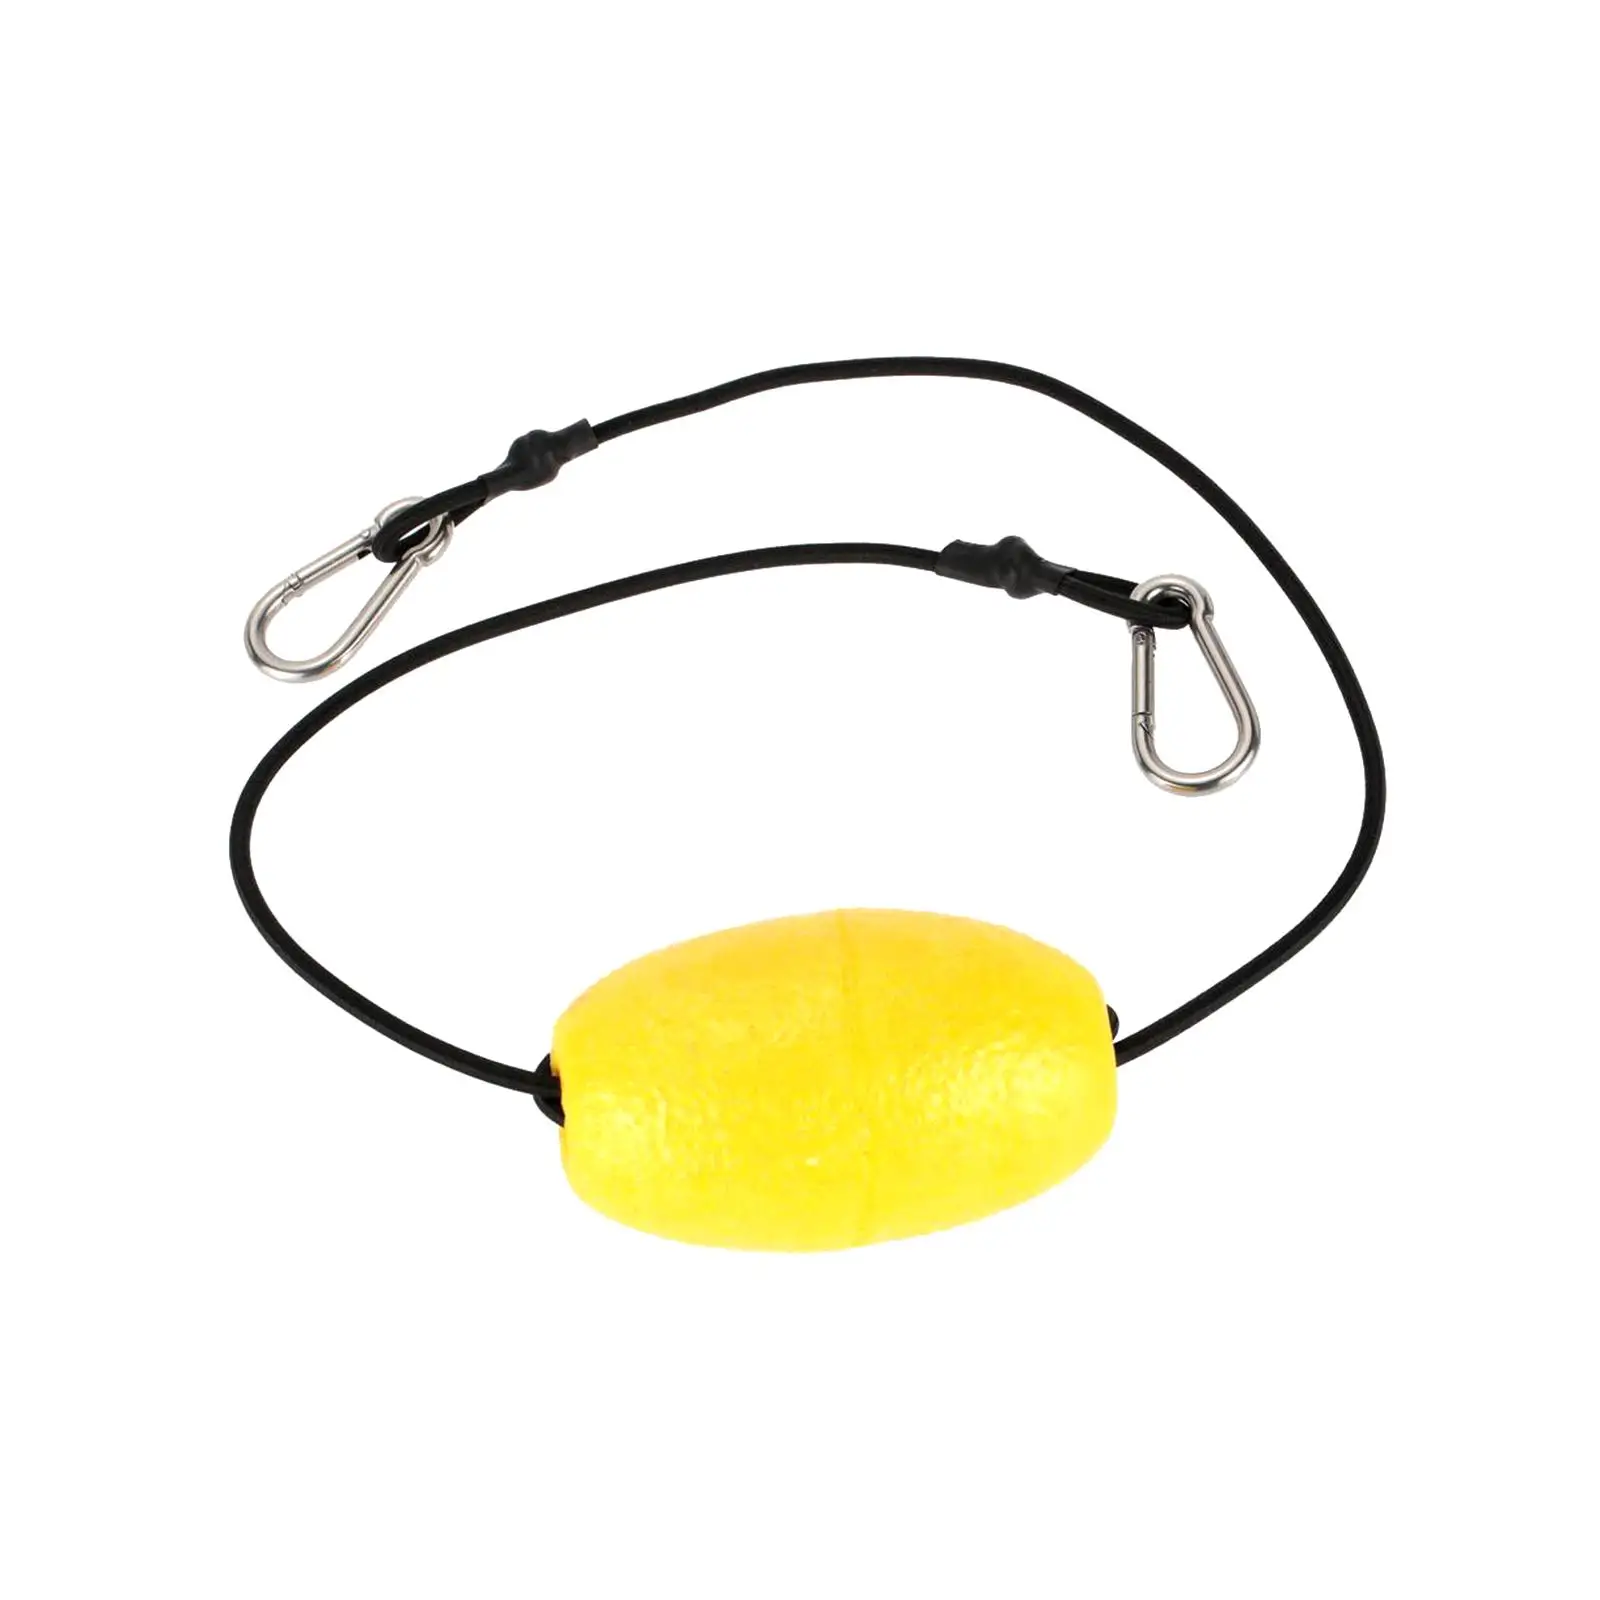 Kayak Tow Throw Line Float Buoy with Clip Floating Drift Anchor Rope Float Rope for Yacht Boating Docking Canoeing